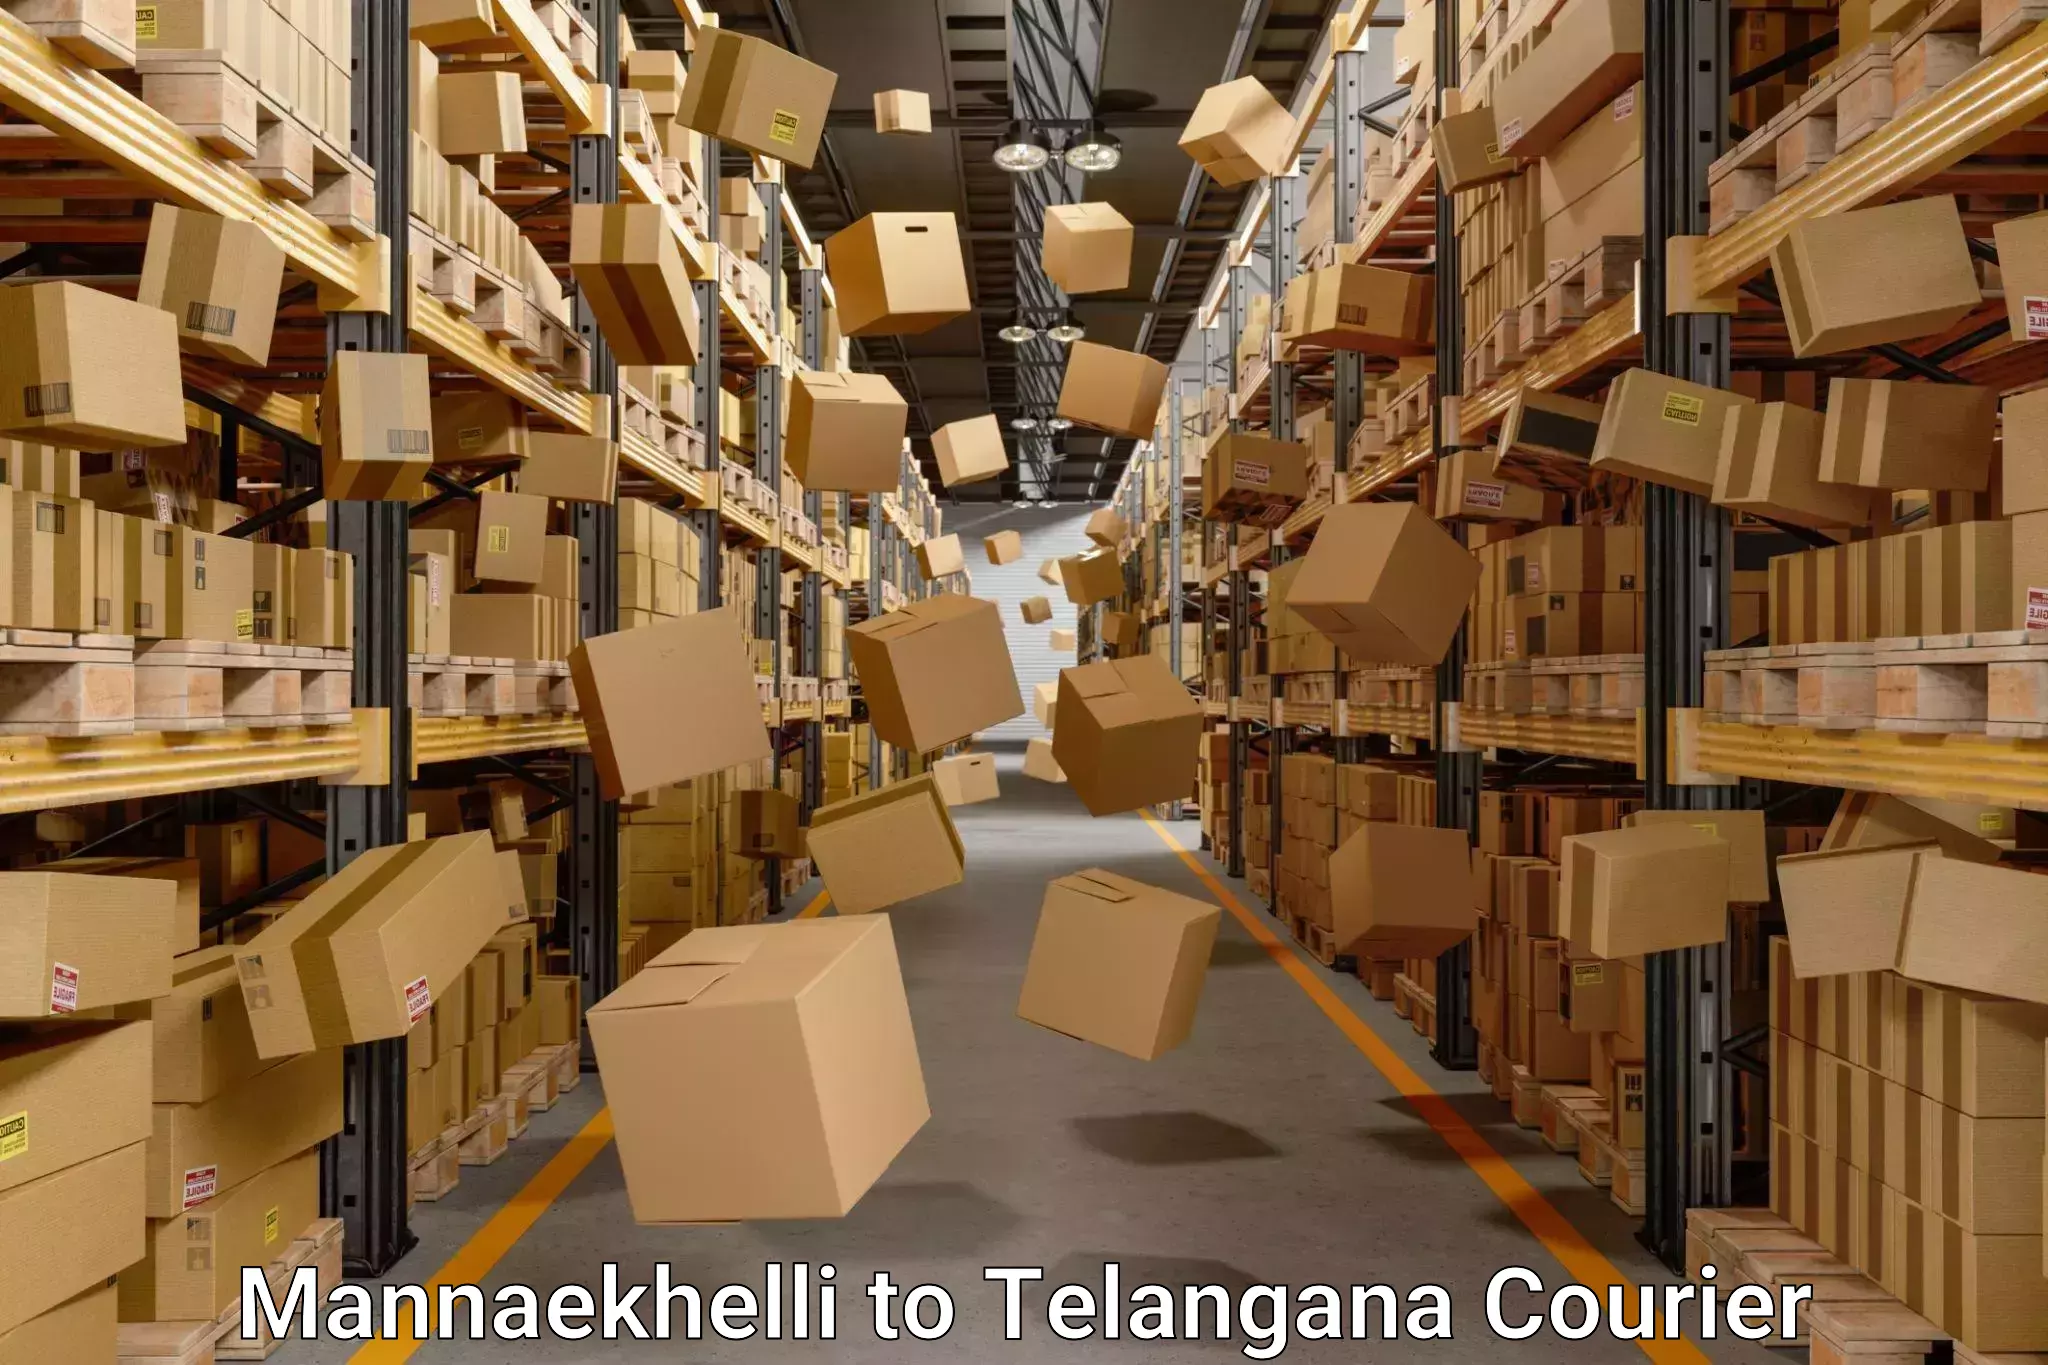 Moving and storage services in Mannaekhelli to Telangana